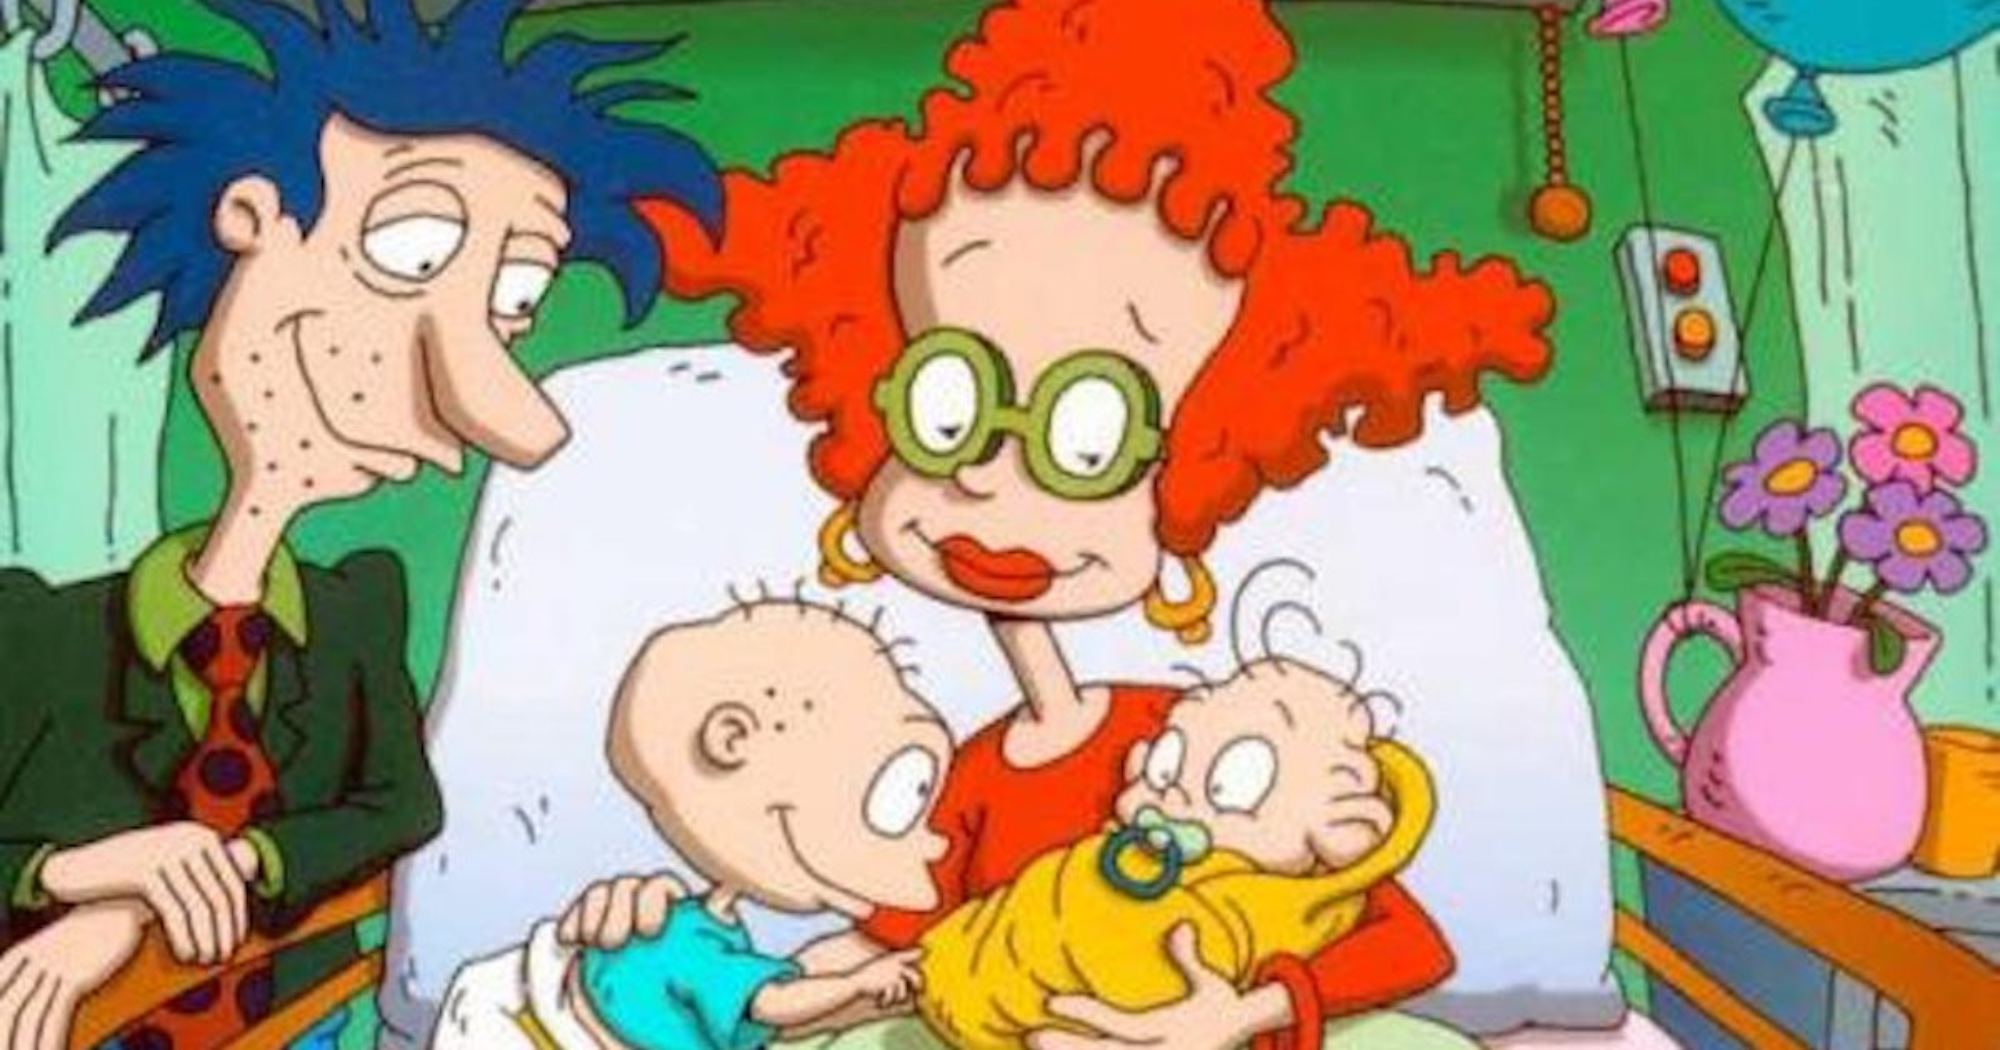 'Rugrats' parents Stu and Didi with Tommy and Dil Pickles. Didi is laying down in a hospital bed, holding the babies, while Stu is standing next to the bed, smiling.